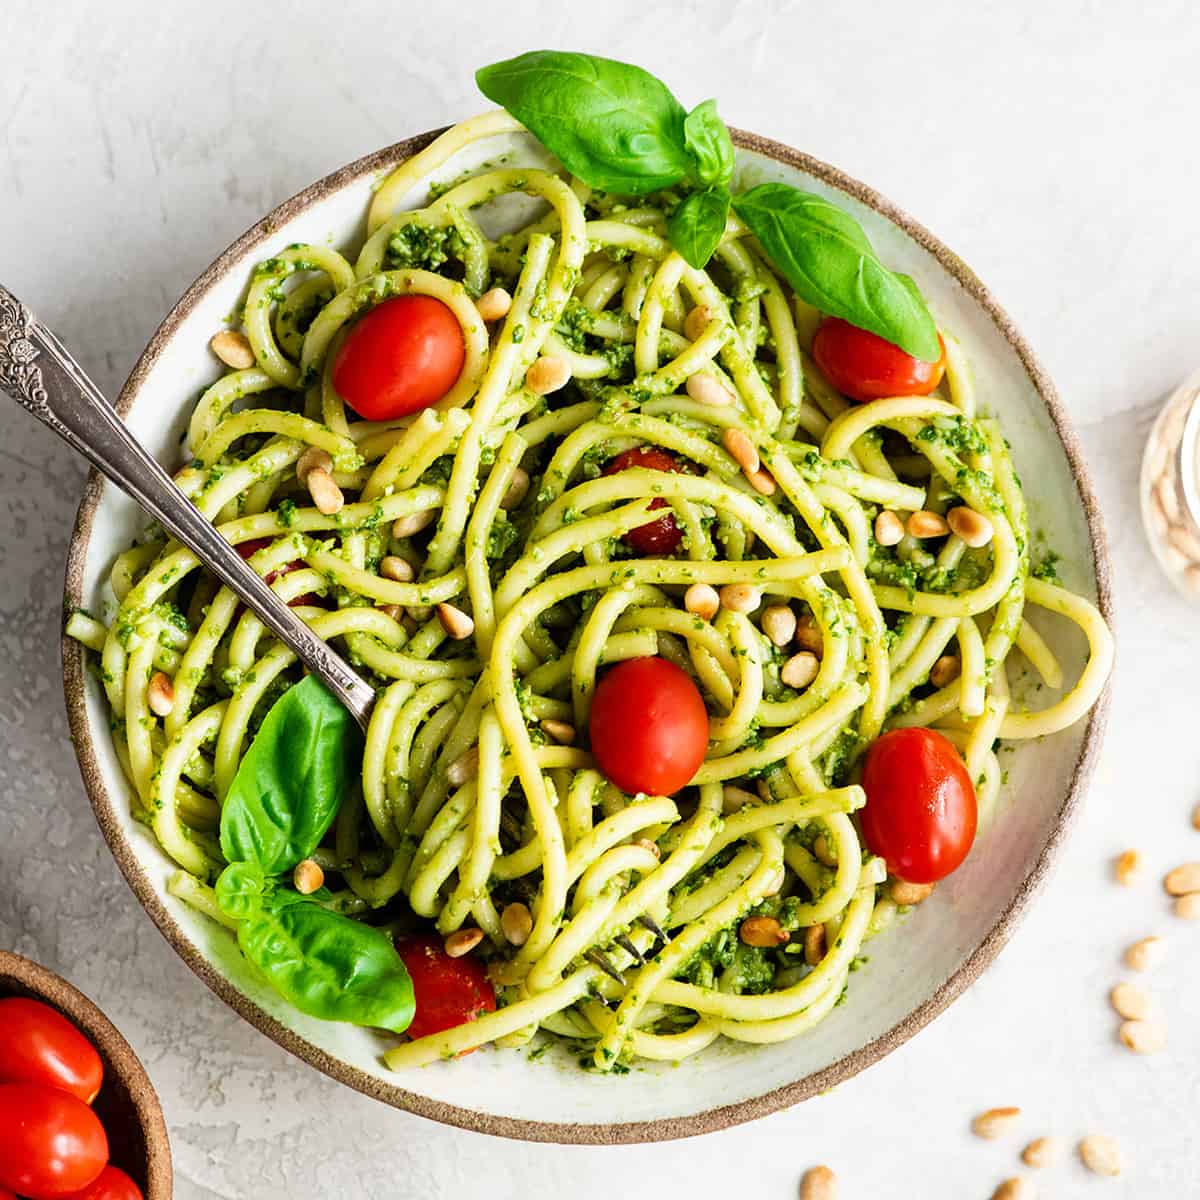 a bowl of pesto pasta garnished with tomatoes, pine nuts and basil